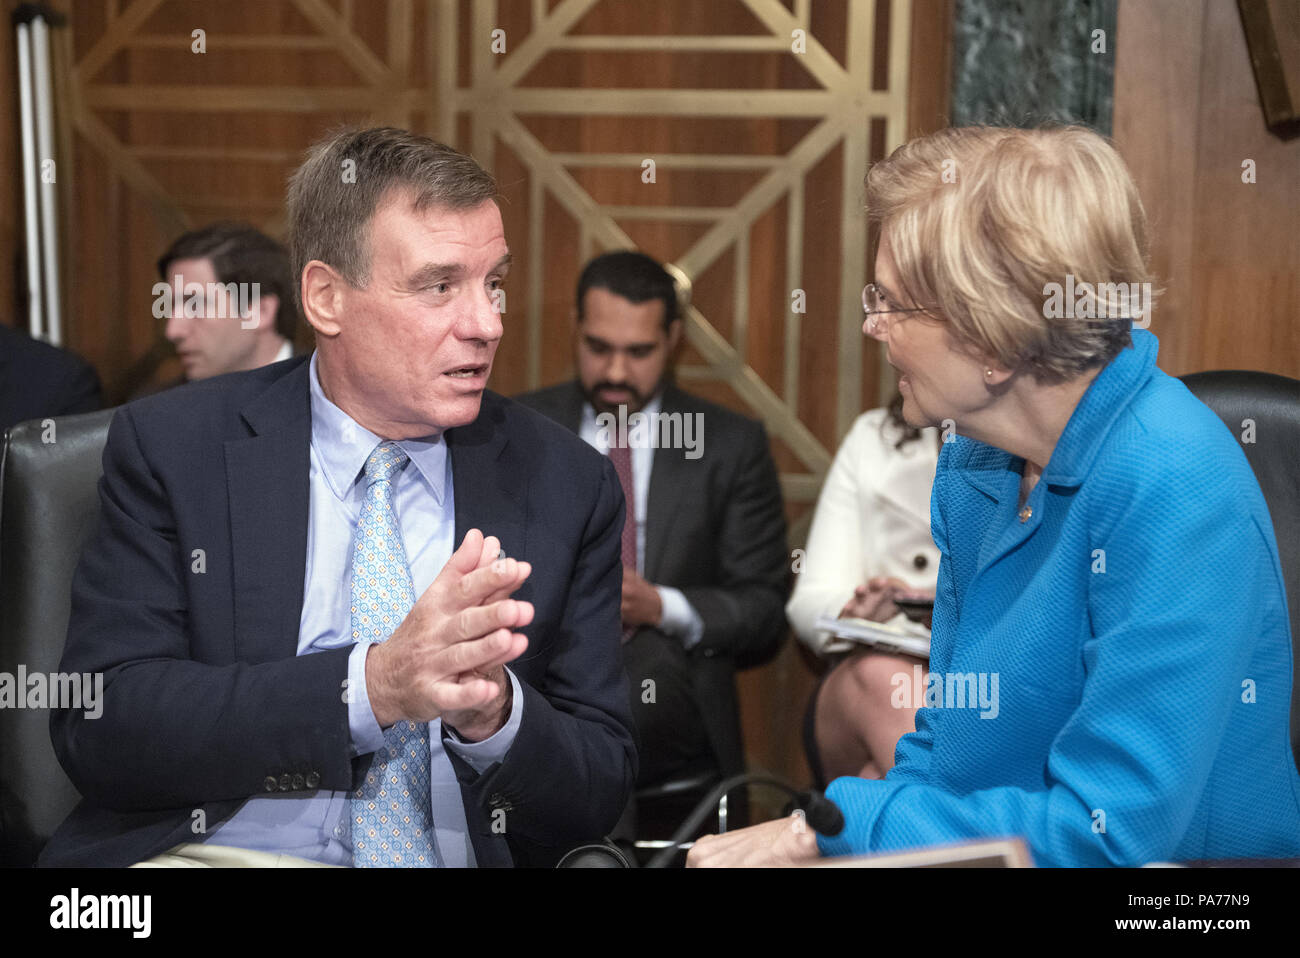 July 19, 2018 - Washington, District of Columbia, United States of America - United States Senators Mark Warner (Democrat of Virginia), left, and Elizabeth Warren (Democrat of Massachusetts), right, converse prior to hearing testimony from Kathleen Laura Kraninger, on her nomination to be Director, Bureau of Consumer Financial Protection (CFPB), and Kimberly A. Reed on her nomination to be President, Export-Import Bank, before the US Senate Committee on Banking, Housing and Urban Affairs on Capitol Hill in Washington, DC on Thursday, July 19, 2018.Credit: Ron Sachs/CNP (Credit Image: © Ron Stock Photo